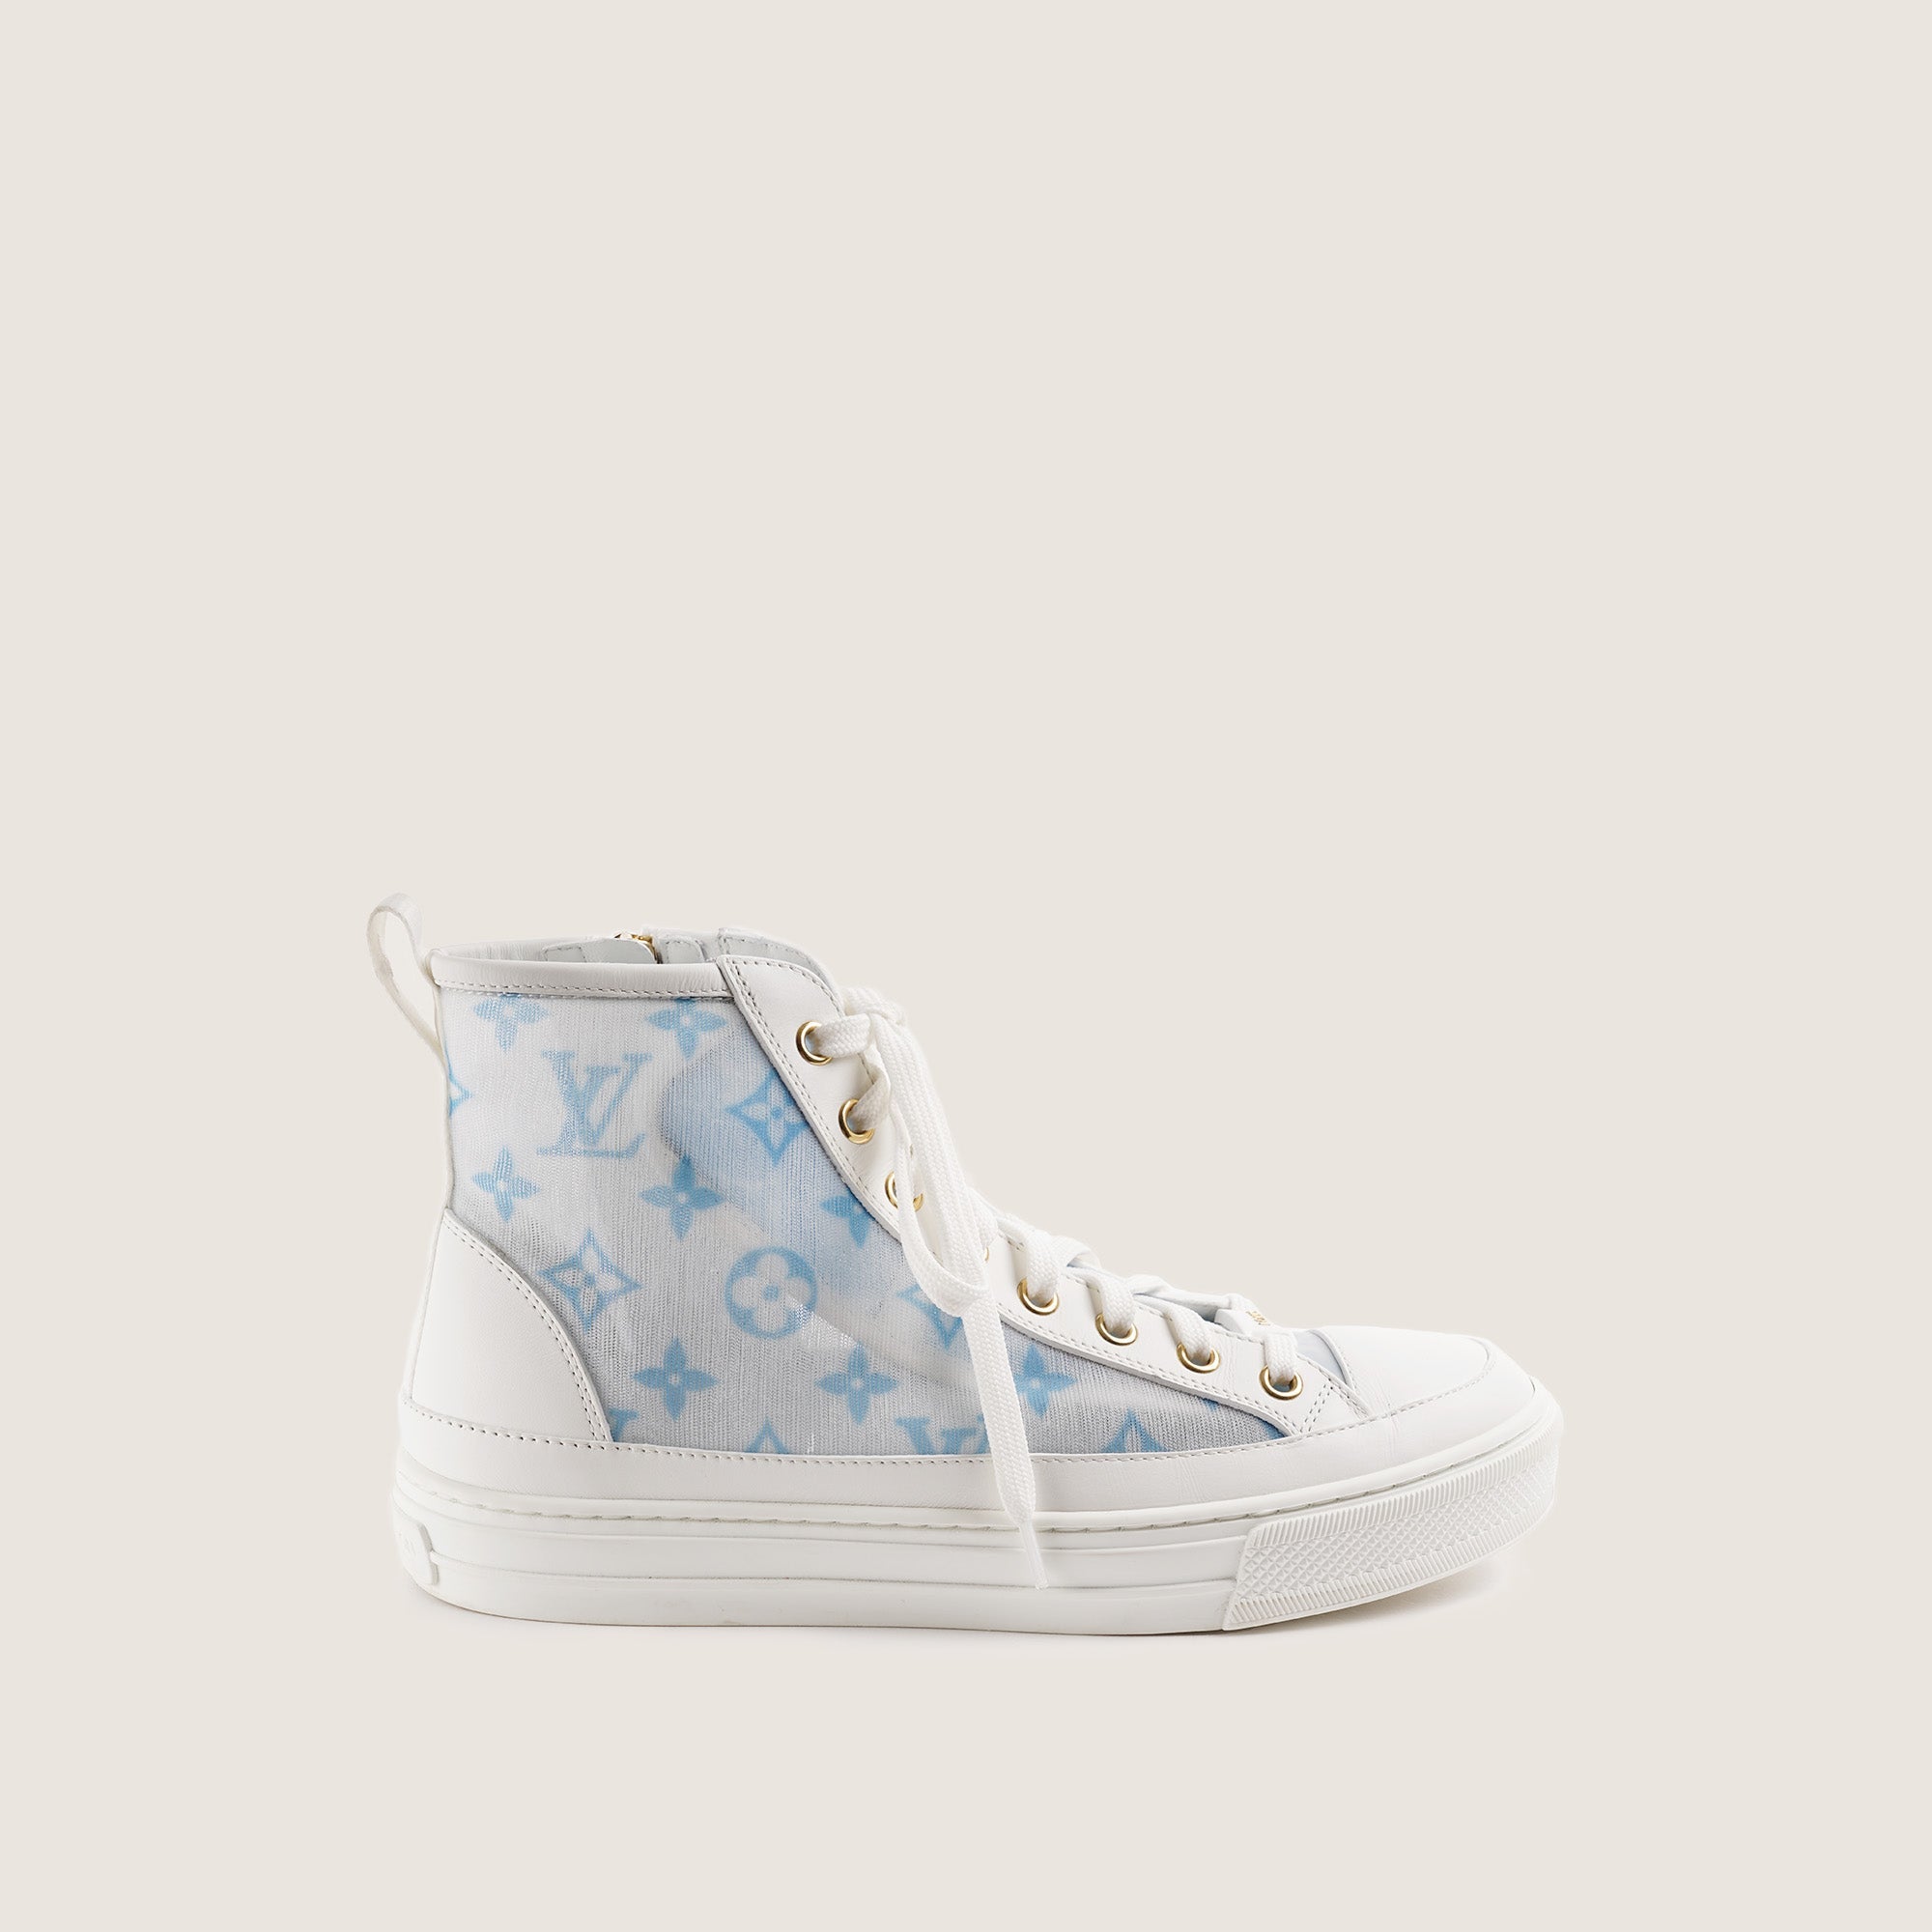 Stellar Trainers 36 ½ - LOUIS VUITTON - Affordable Luxury